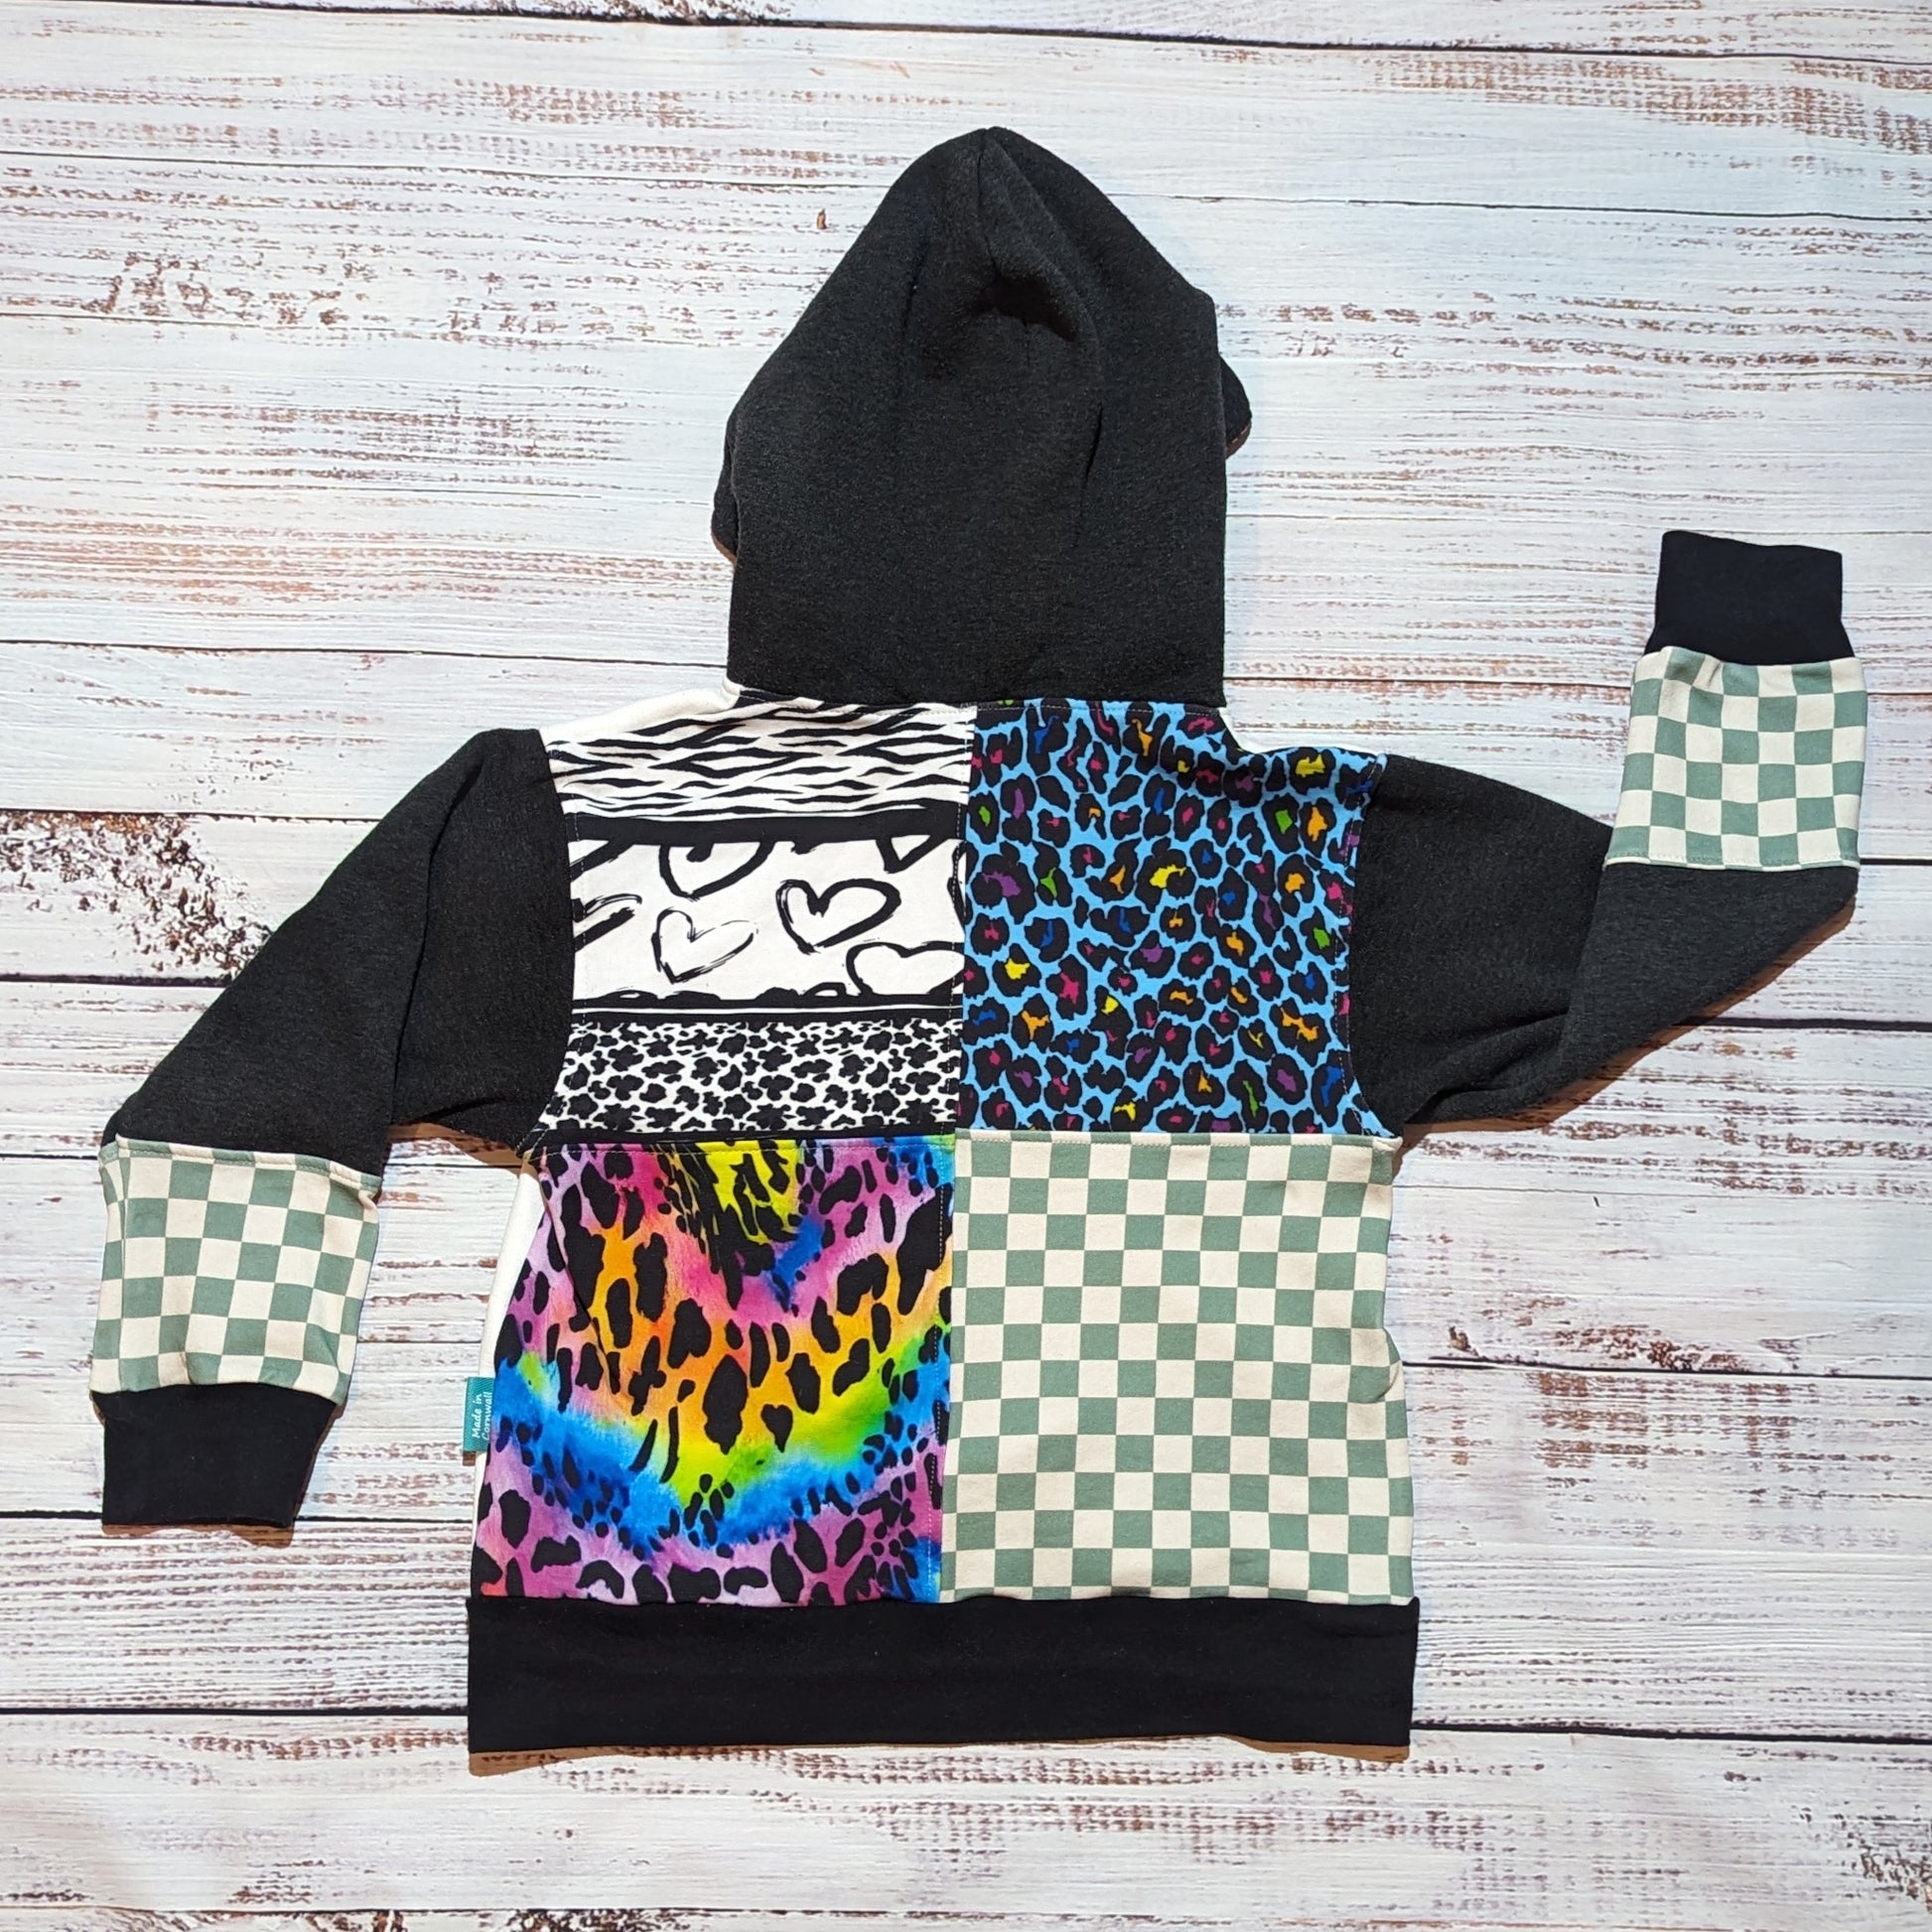 A stunning hoodie with an eclectic mix of colours and patterns. Handmade using neon animal print, neon leopard print, animal hearts, mint checked, white and charcoal cotton French terry and cotton ribbing. Showing the patchwork style back.